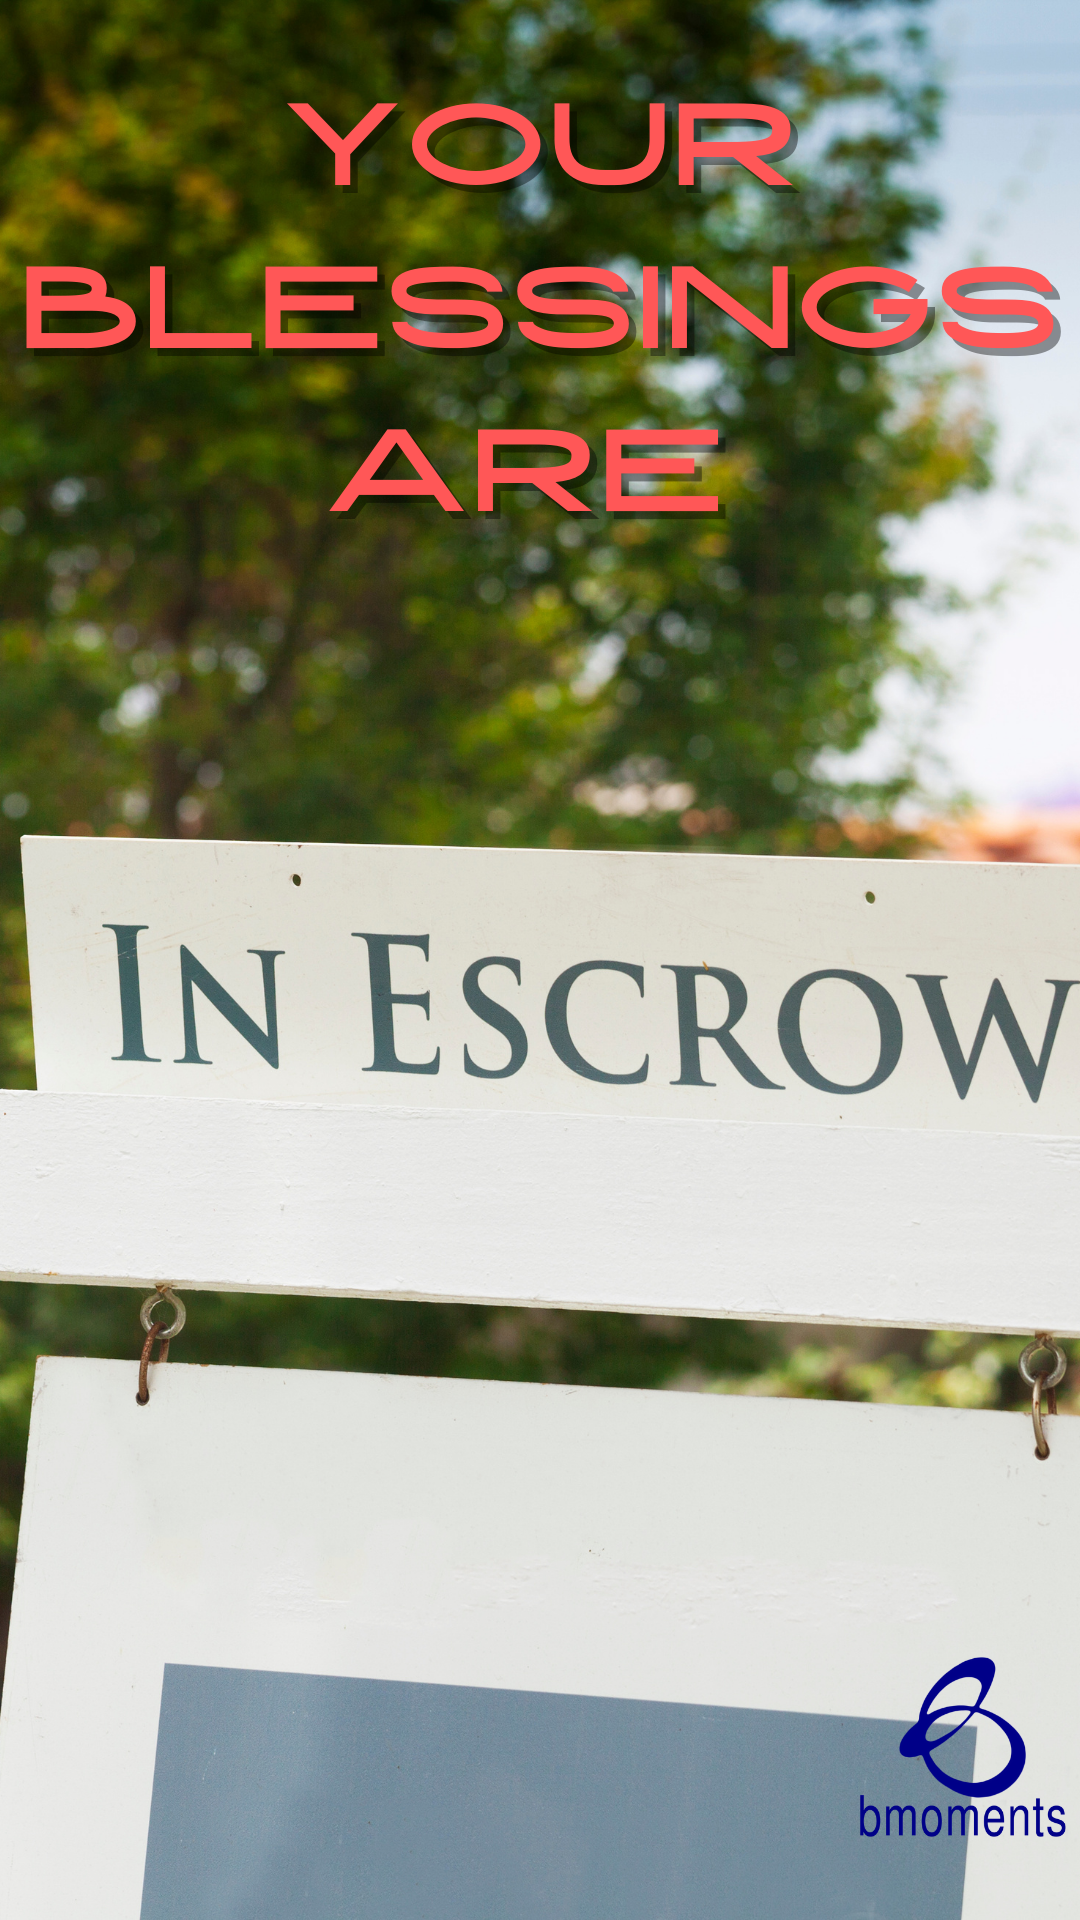 Be Encouraged: Your Blessings Are in Escrow